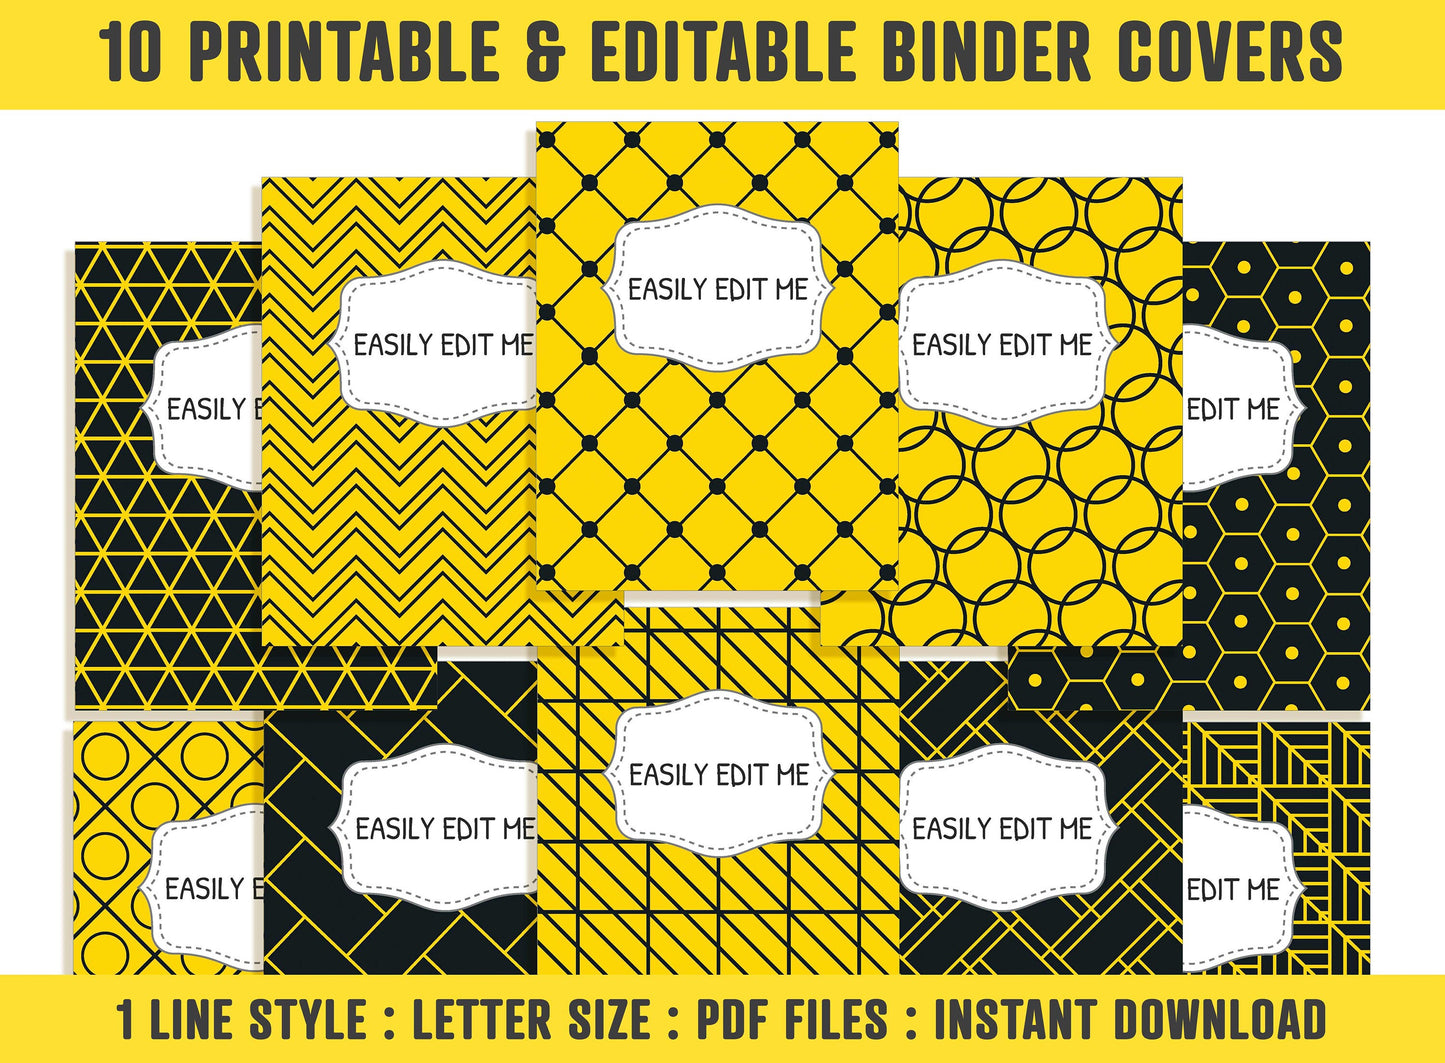 Yellow and Black Binder Cover, 10 Printable & Editable Binder Covers + Spines, Binder Inserts, Teacher/School Planner Template